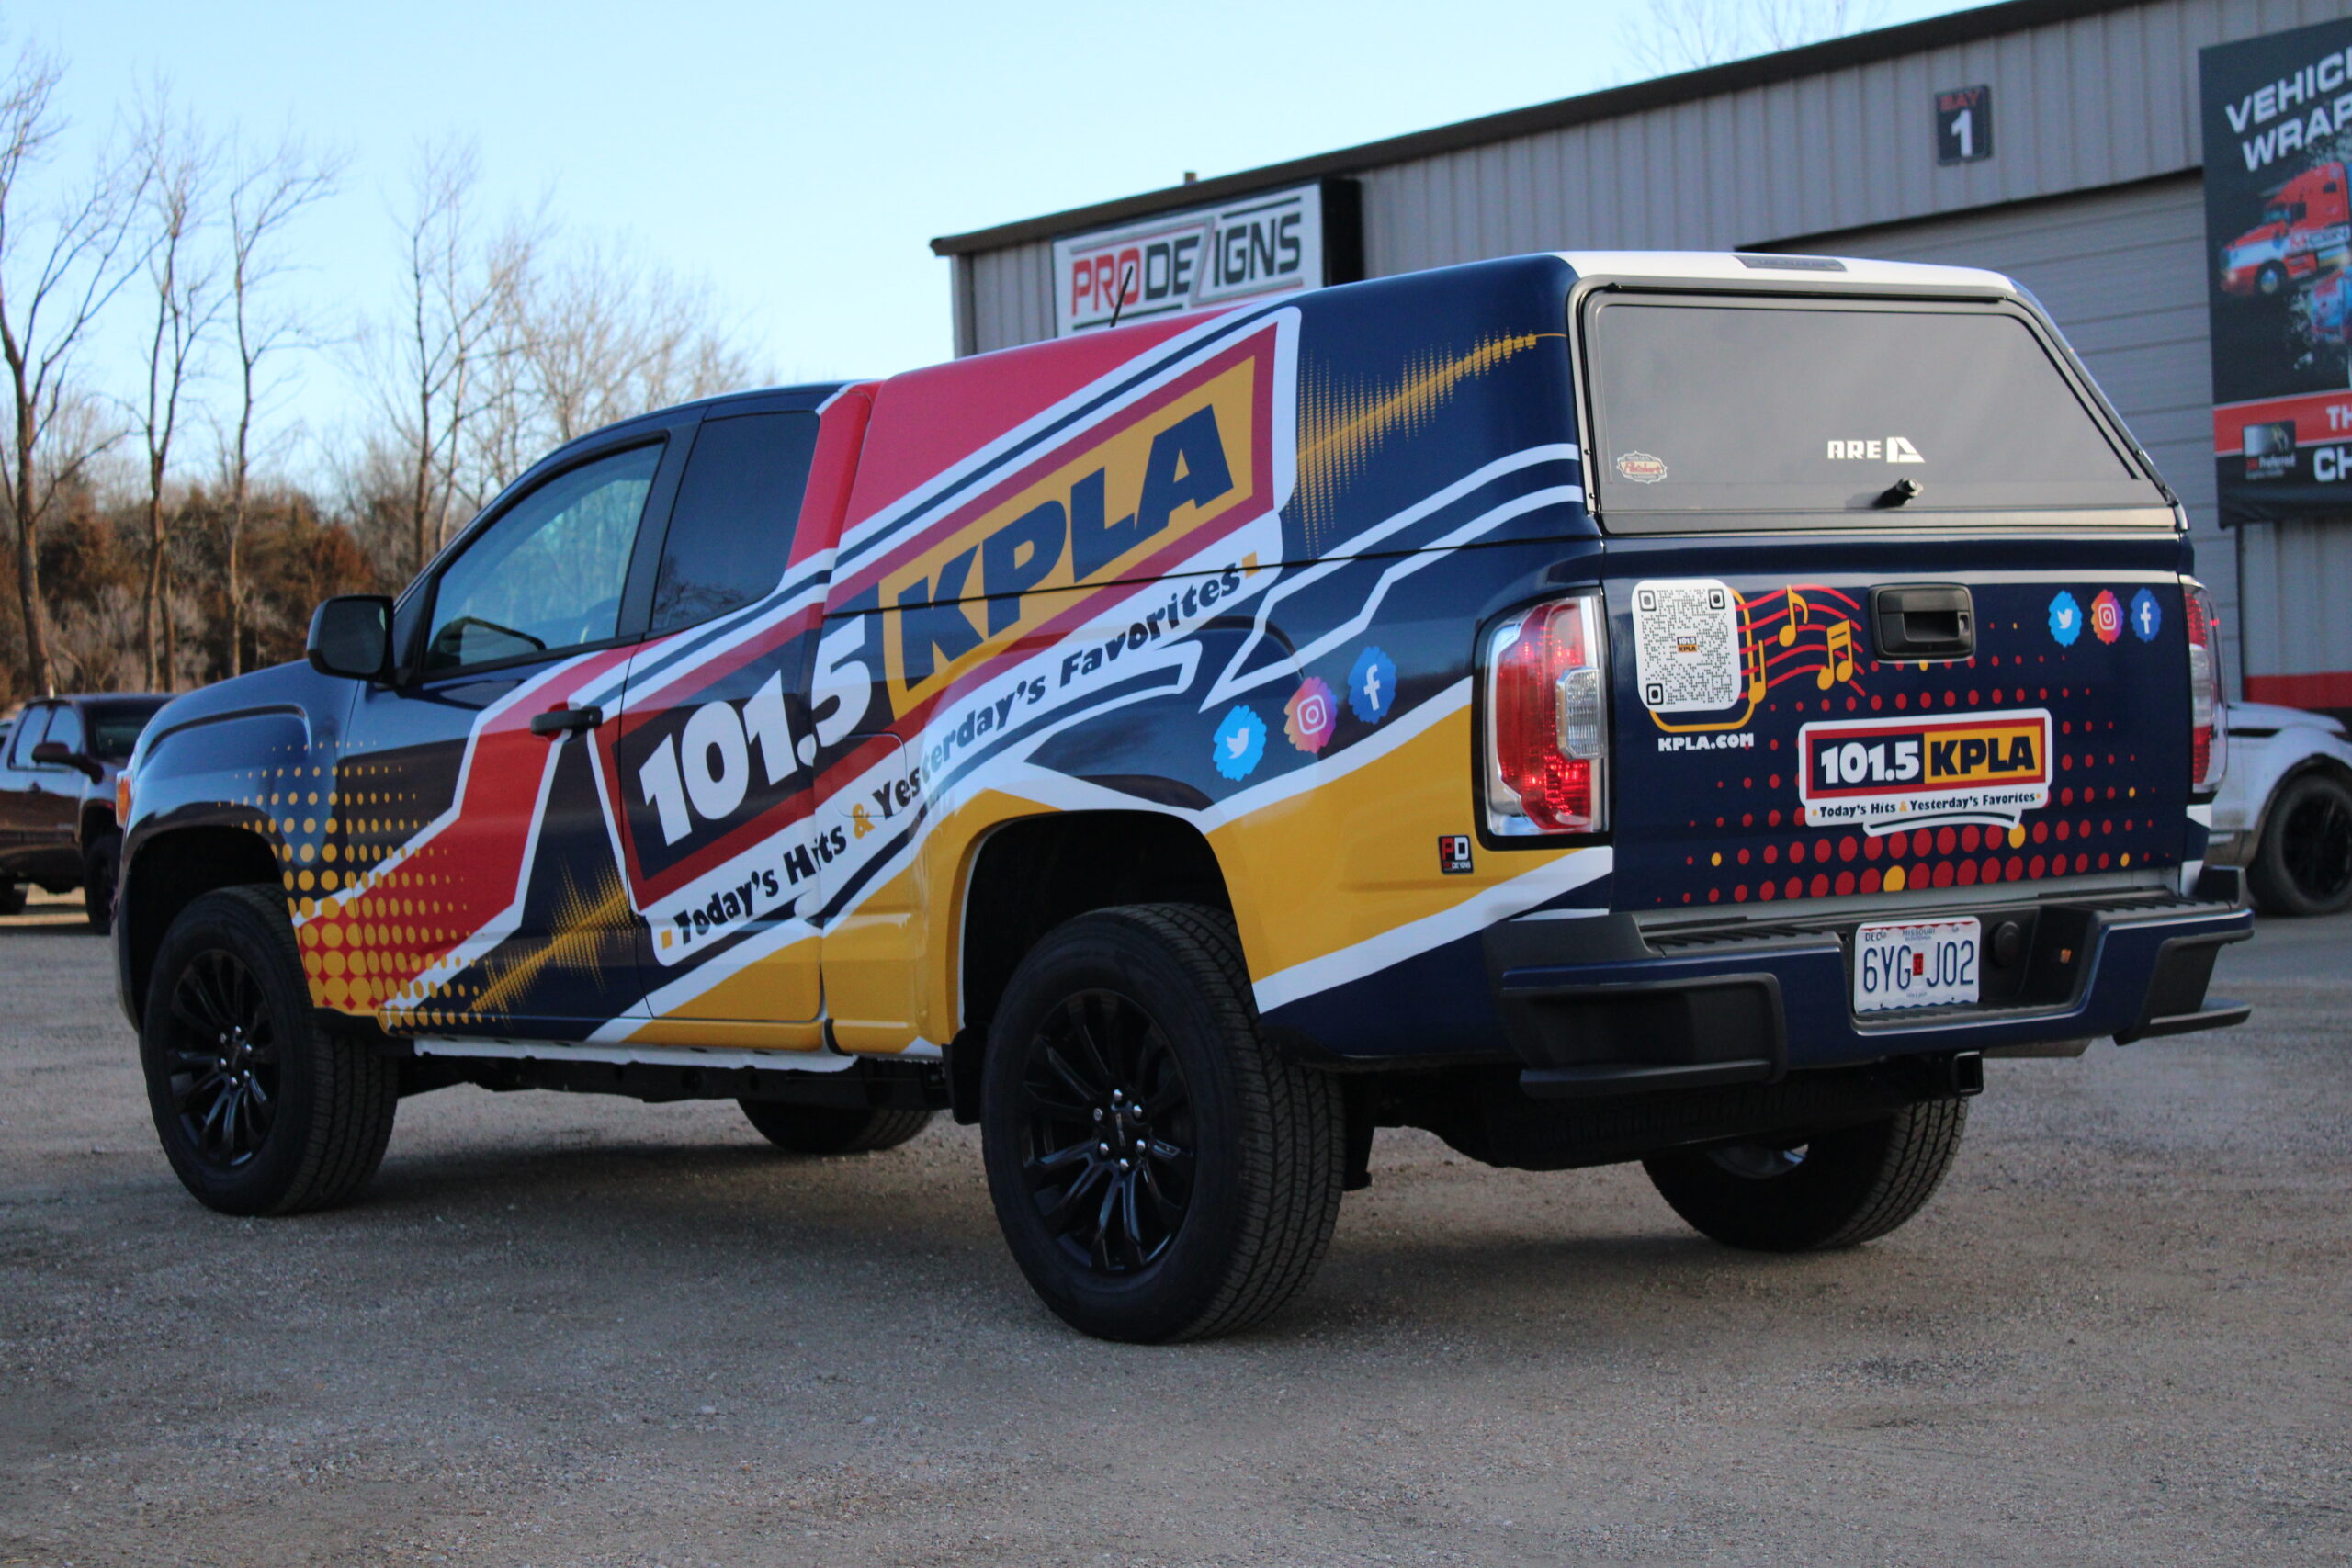 Commercial Vehicle Wrap T Ruck Radio Station Advertising And Branding Columbia Missouri 101.5 Kpla